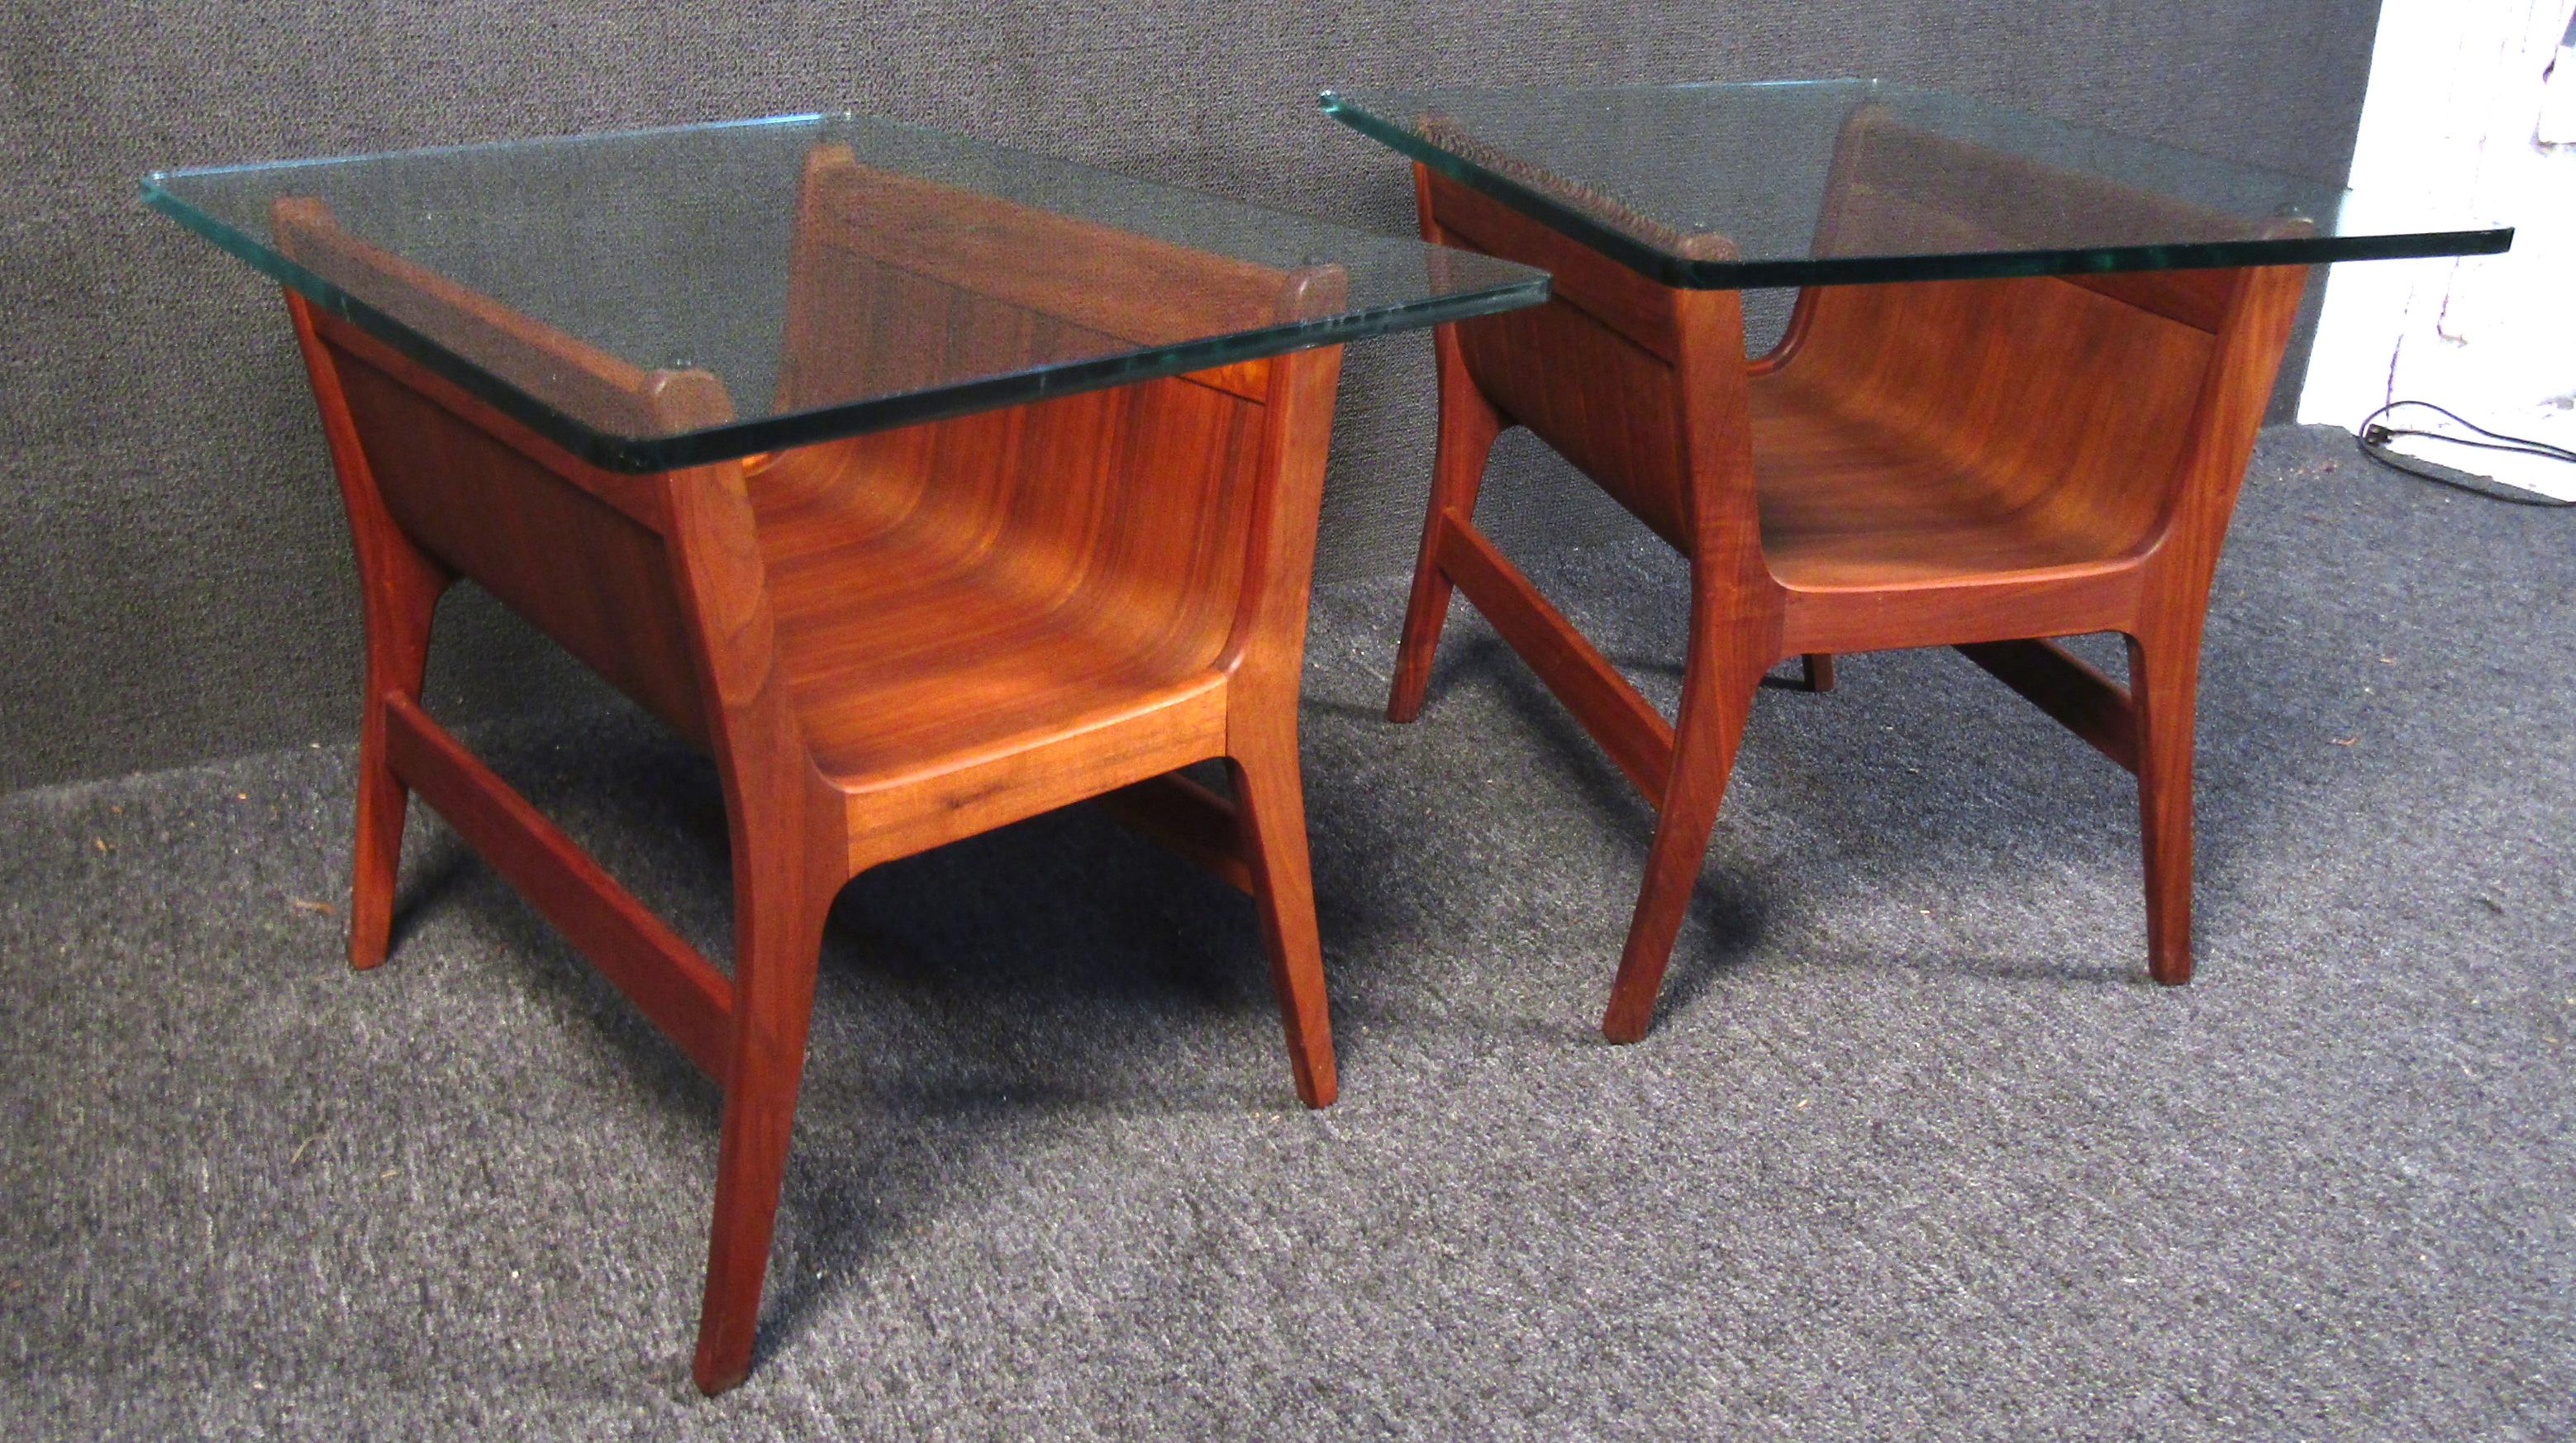 Mid-20th Century Beautiful Mid-Century Modern Sculptural Wood Side Tables with Glass Tops For Sale